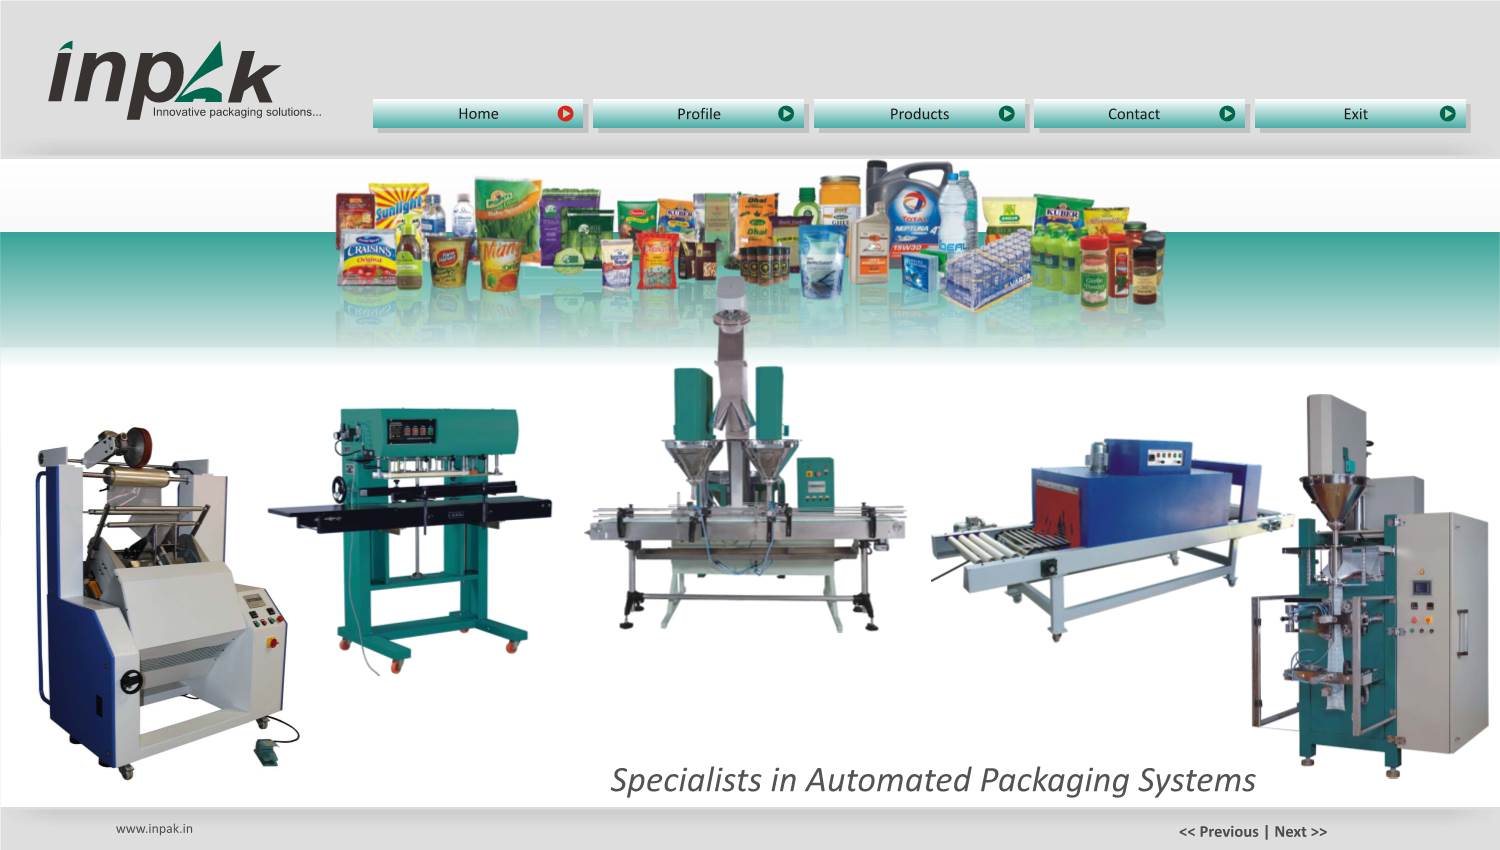 Specialists in Automated Packaging Systems